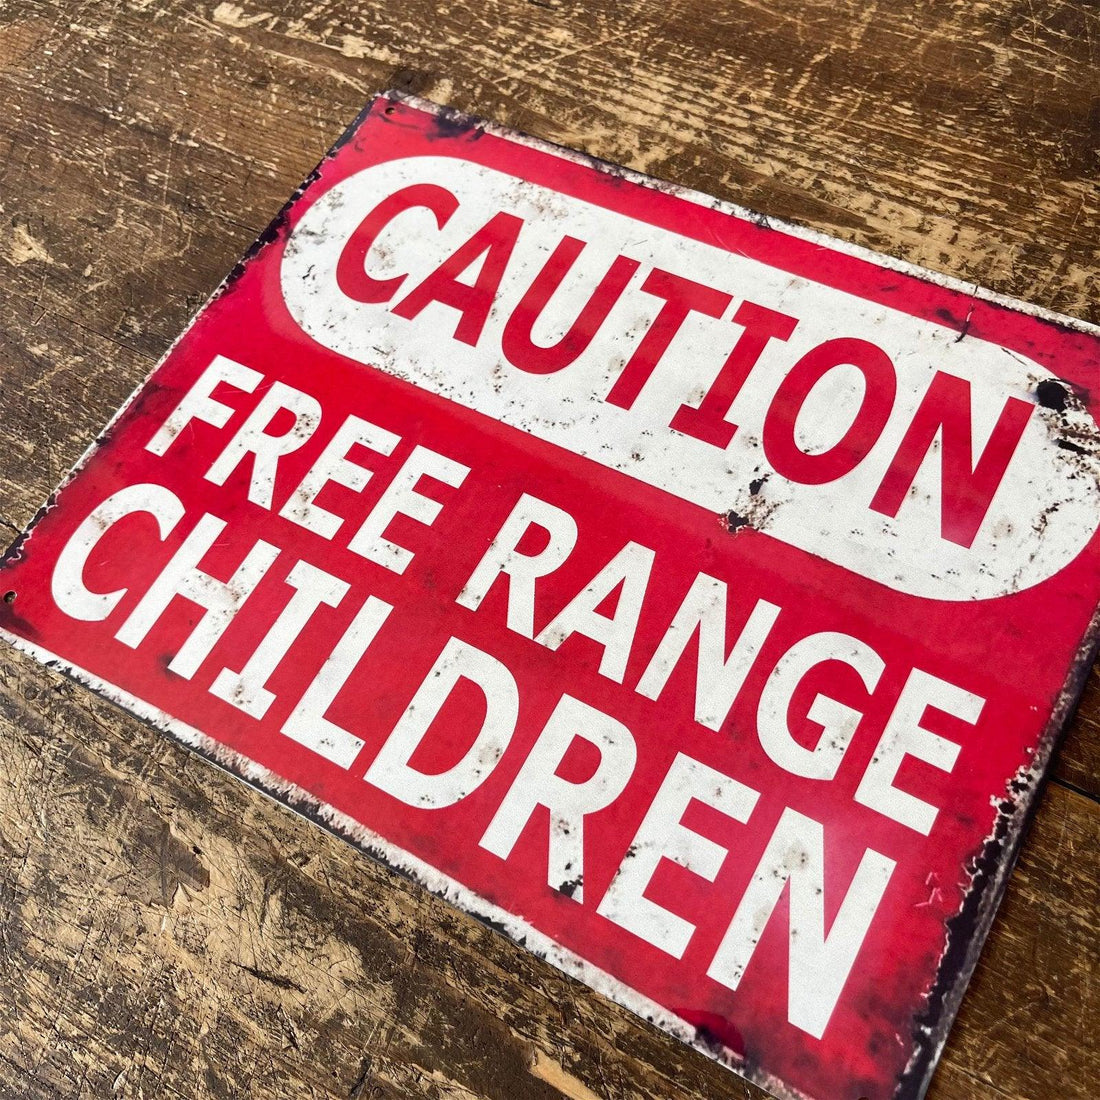 Vintage Metal Sign - Caution Free Range Children Wall Sign - £18.99 - Signs & Rules 